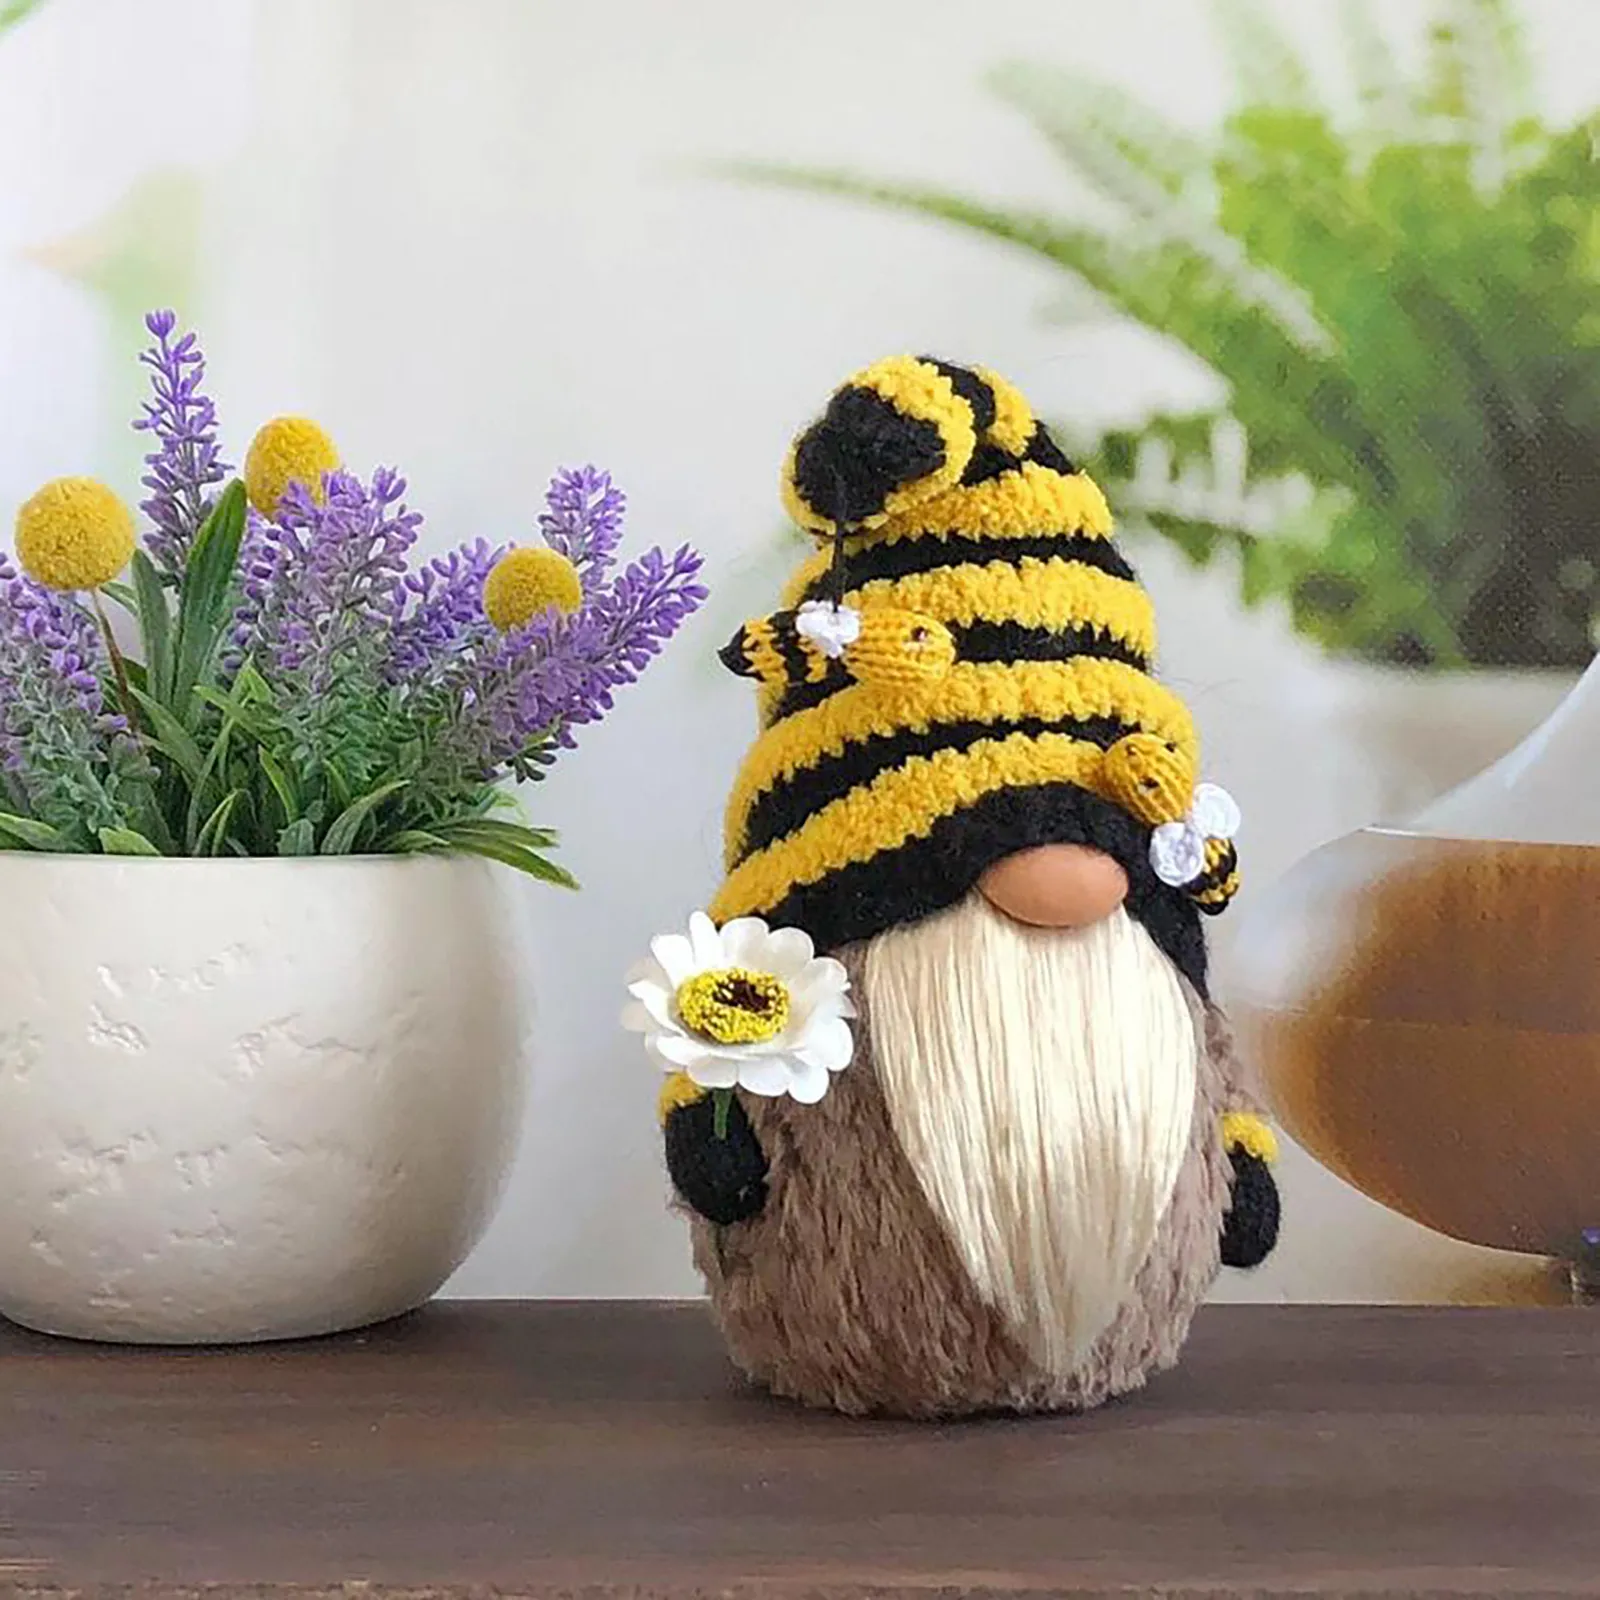 Easter Faceless Doll Bumble Bee Striped Gnome Scandinavian Tomte Nisse Swedish Honey Bee Elfs Home Old Man Doll Gifts Toys